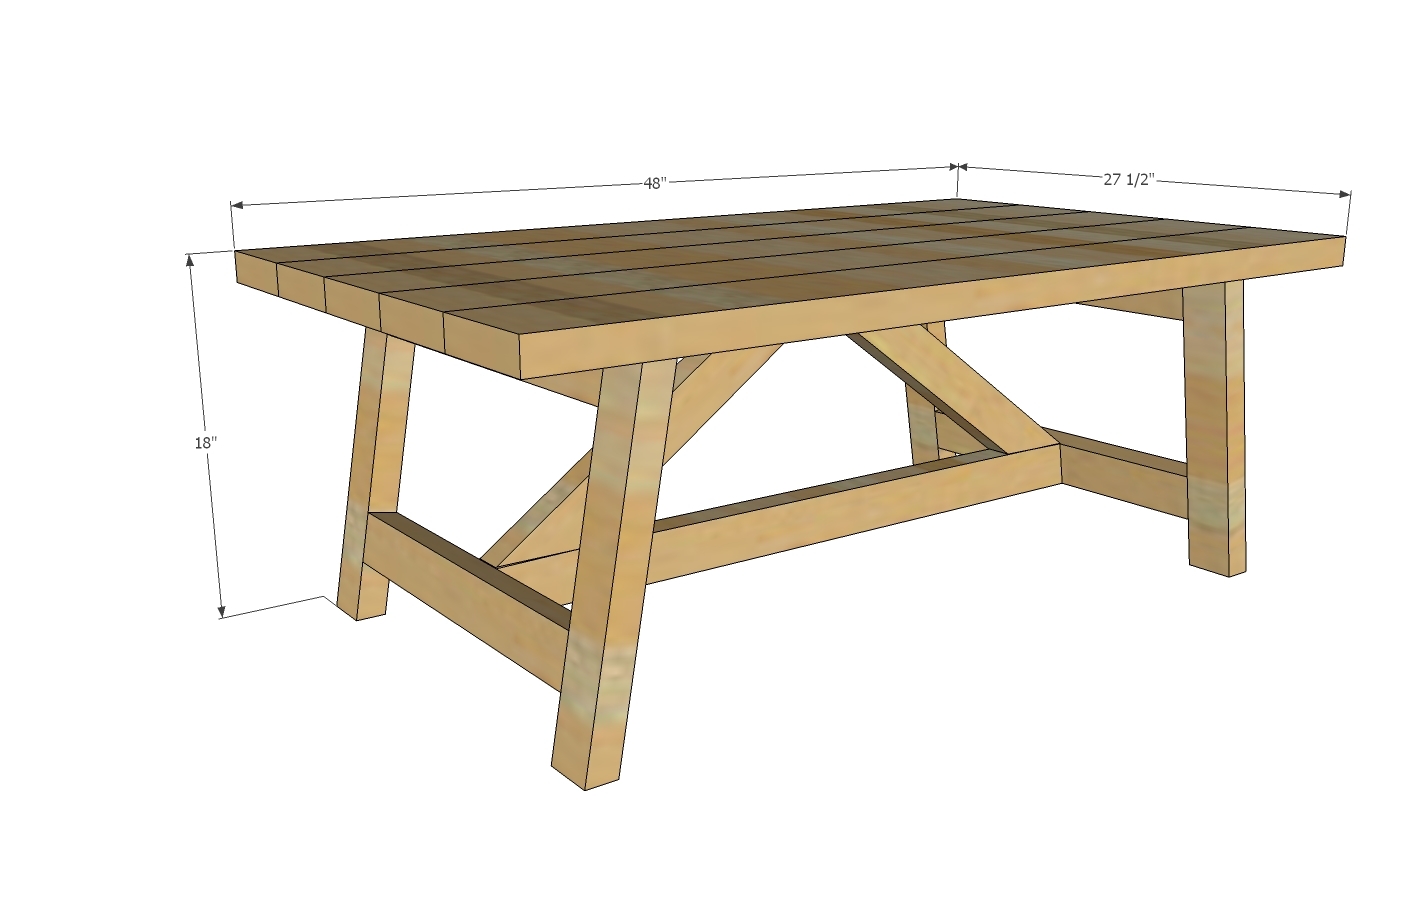 wooden coffee table plans free photo - 2